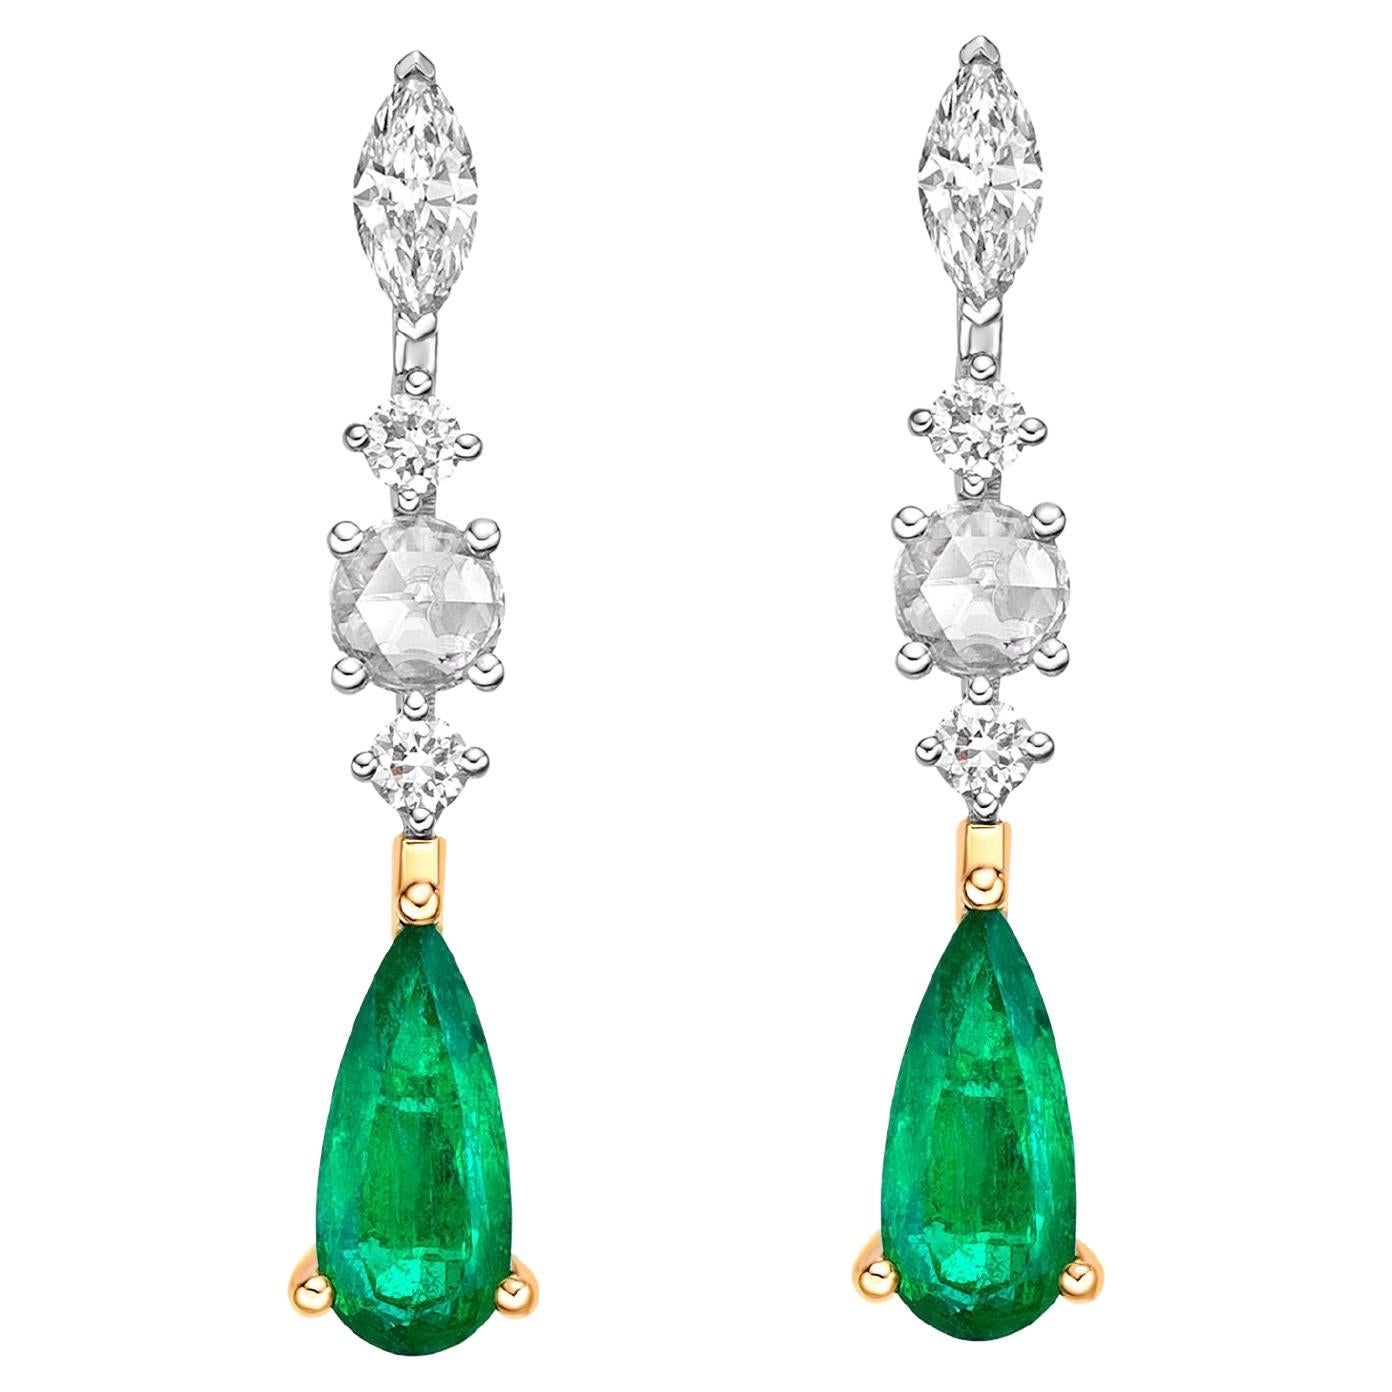 1.64 Carat Emerald Drop Earrings in 18Karat White Yellow Gold with  Diamond. For Sale